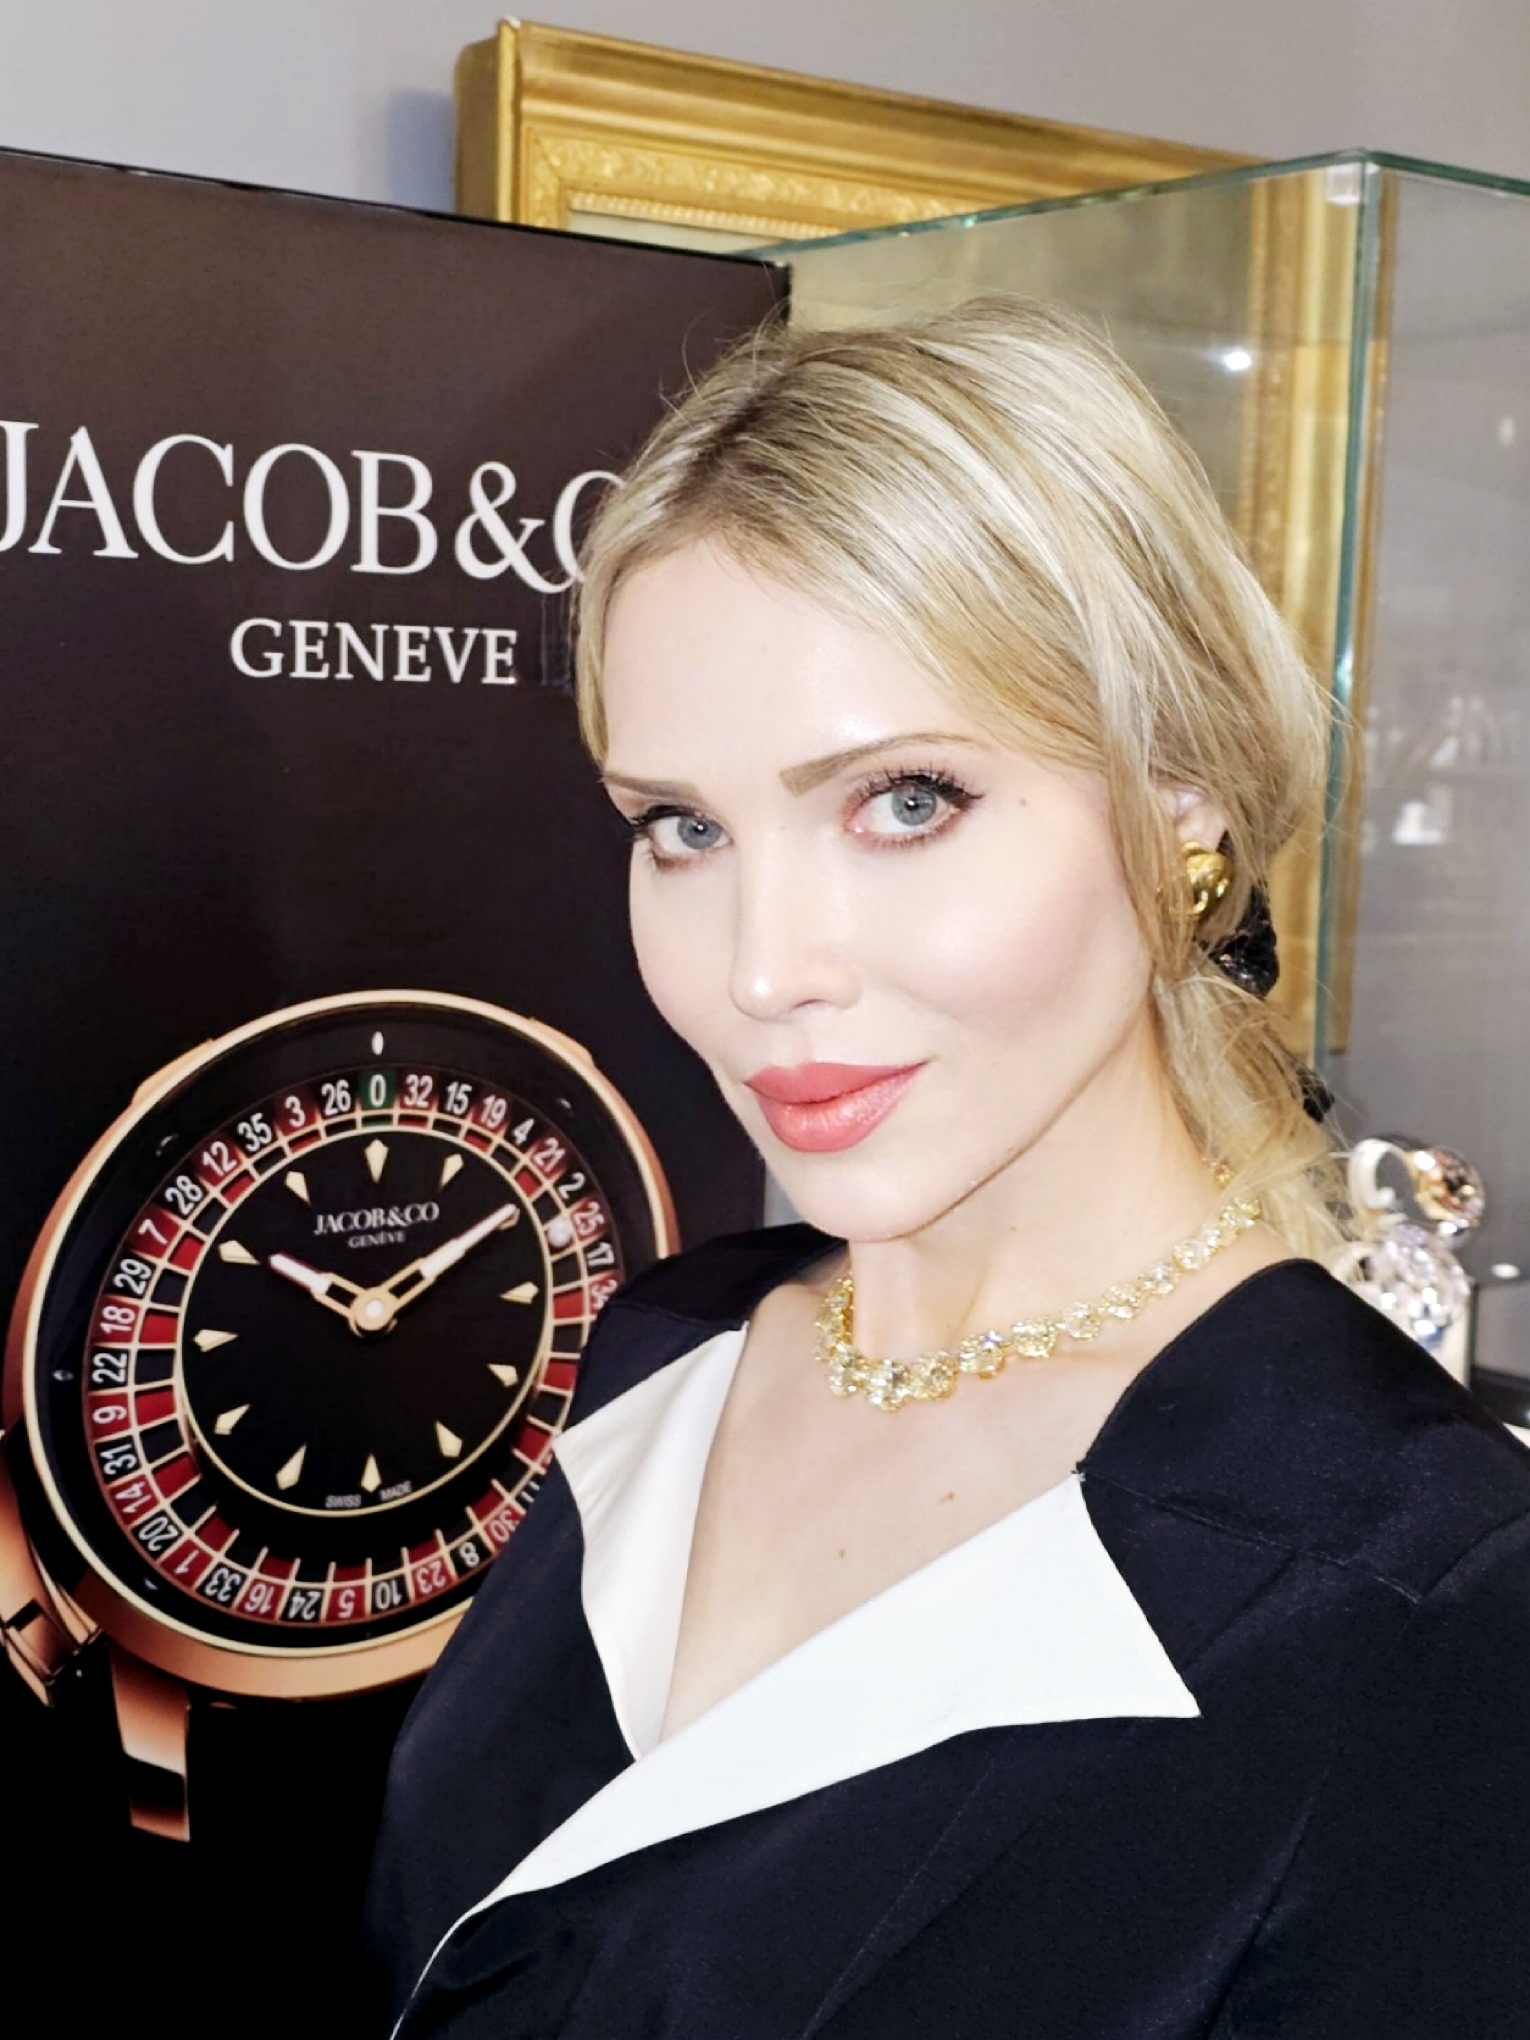 Jacob & Co. unveils the most-precious watch of the Geneva Watch Week